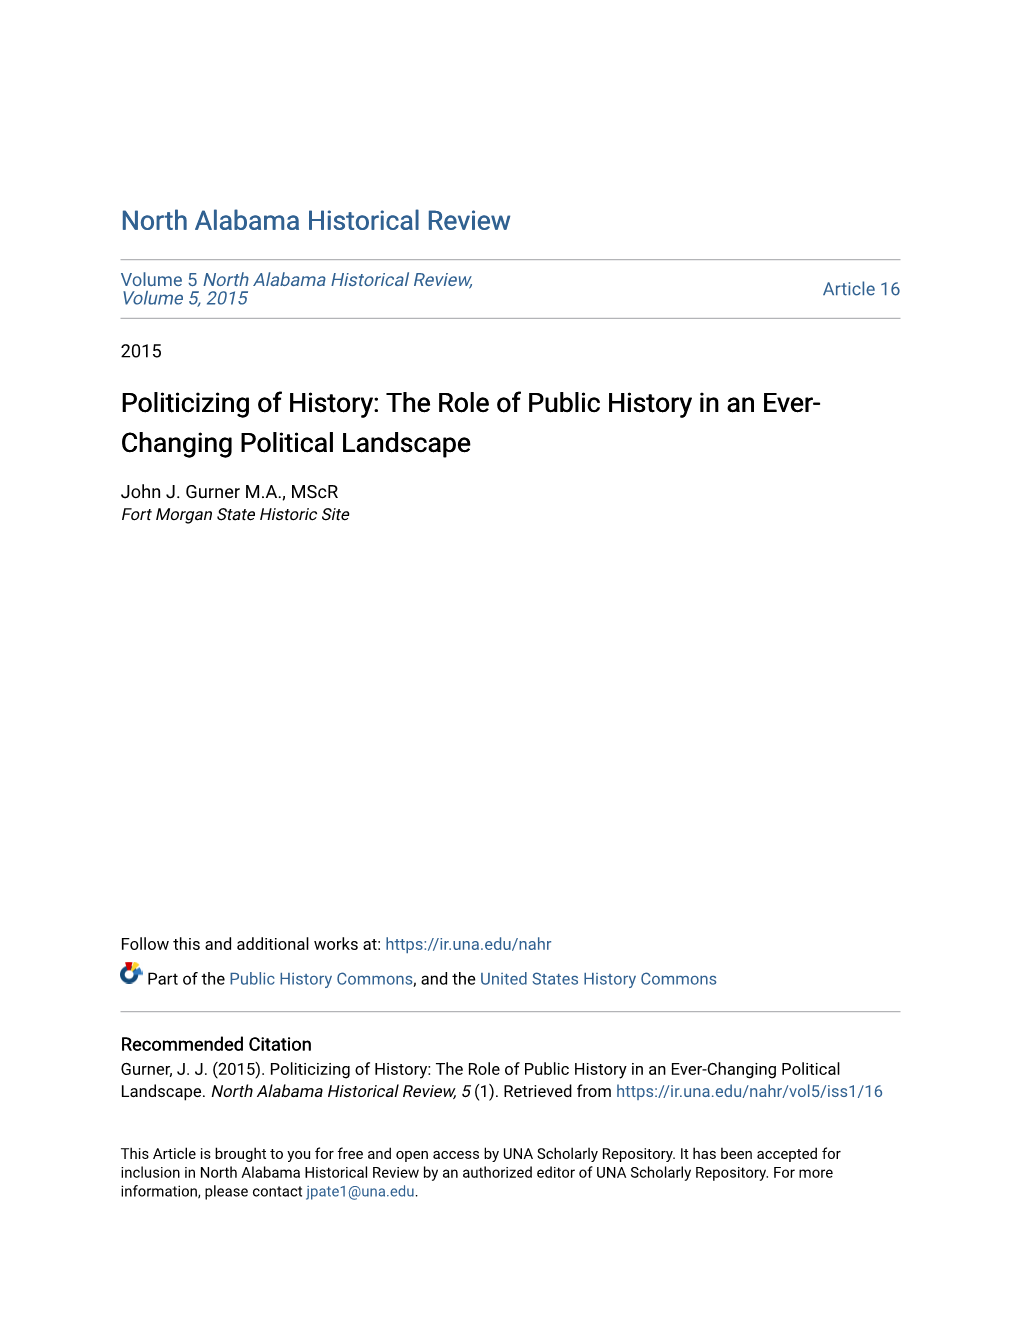 Politicizing of History: the Role of Public History in an Ever- Changing Political Landscape